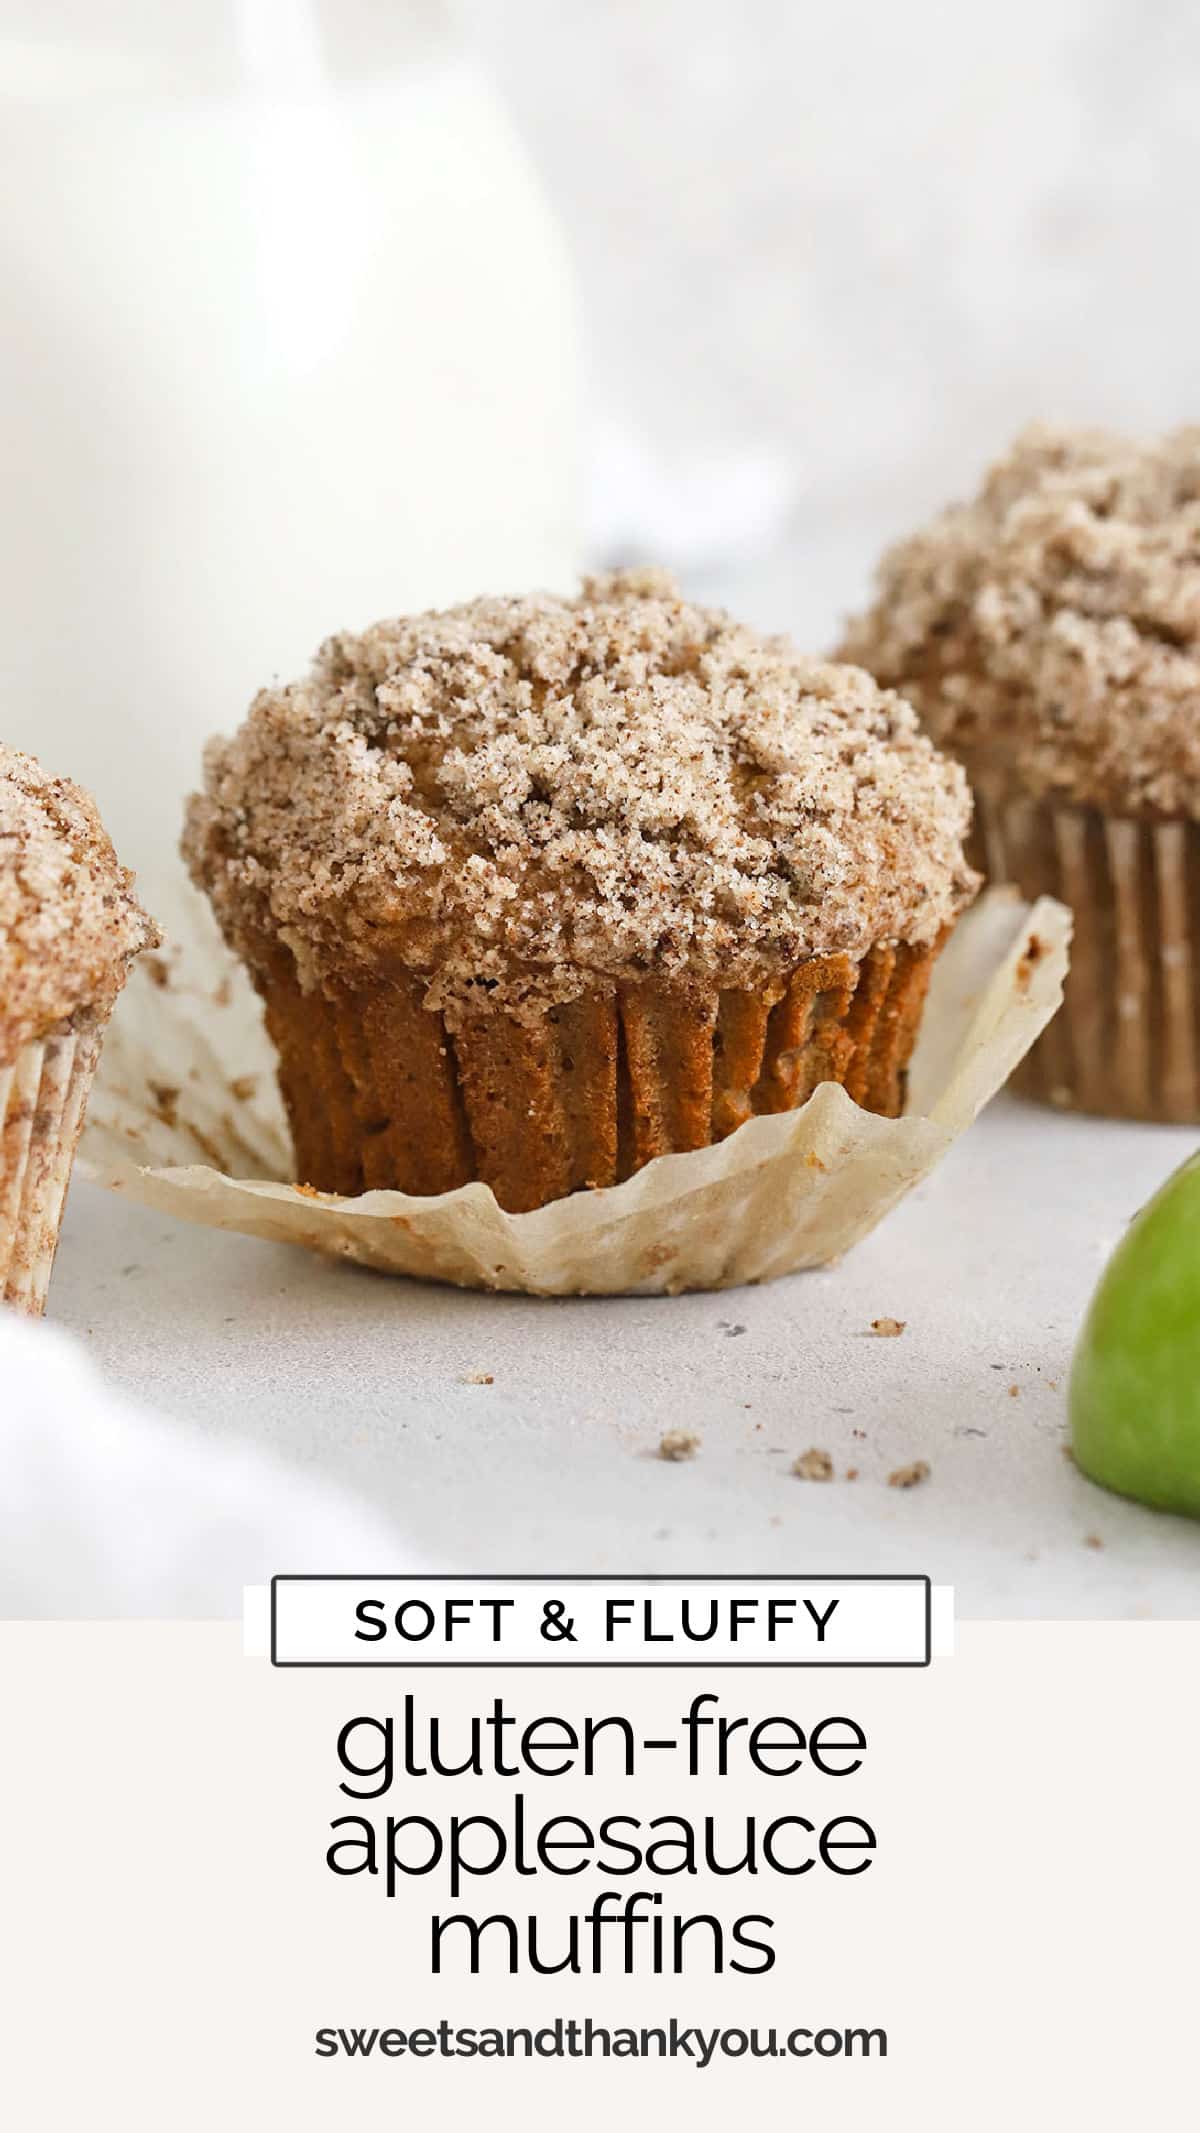 This easy gluten-free applesauce muffins recipe is made from simple ingredients & warm spices. You'll love the soft, fluffy texture! / gluten free apple muffins / gluten free muffins with applesauce / gluten free apple spice muffins / gluten free apple cinnamon muffins / gluten free apple muffin recipe / gluten free fall muffins / gluten free muffins recipe / gluten free breakfast for fall /